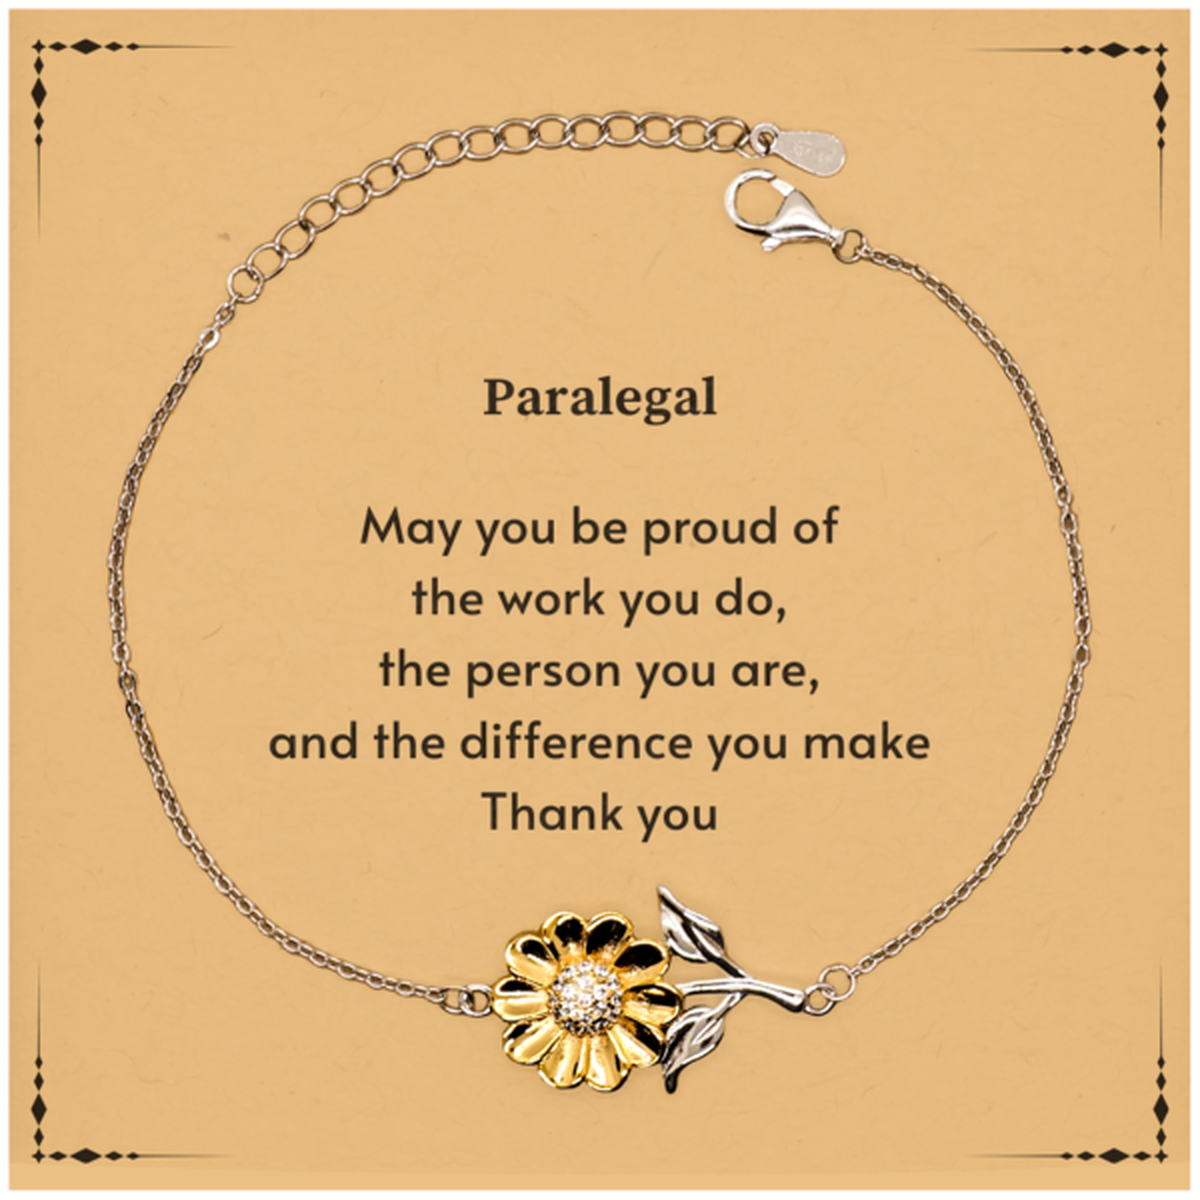 Heartwarming Sunflower Bracelet Retirement Coworkers Gifts for Paralegal, Paralegal May You be proud of the work you do, the person you are Gifts for Boss Men Women Friends